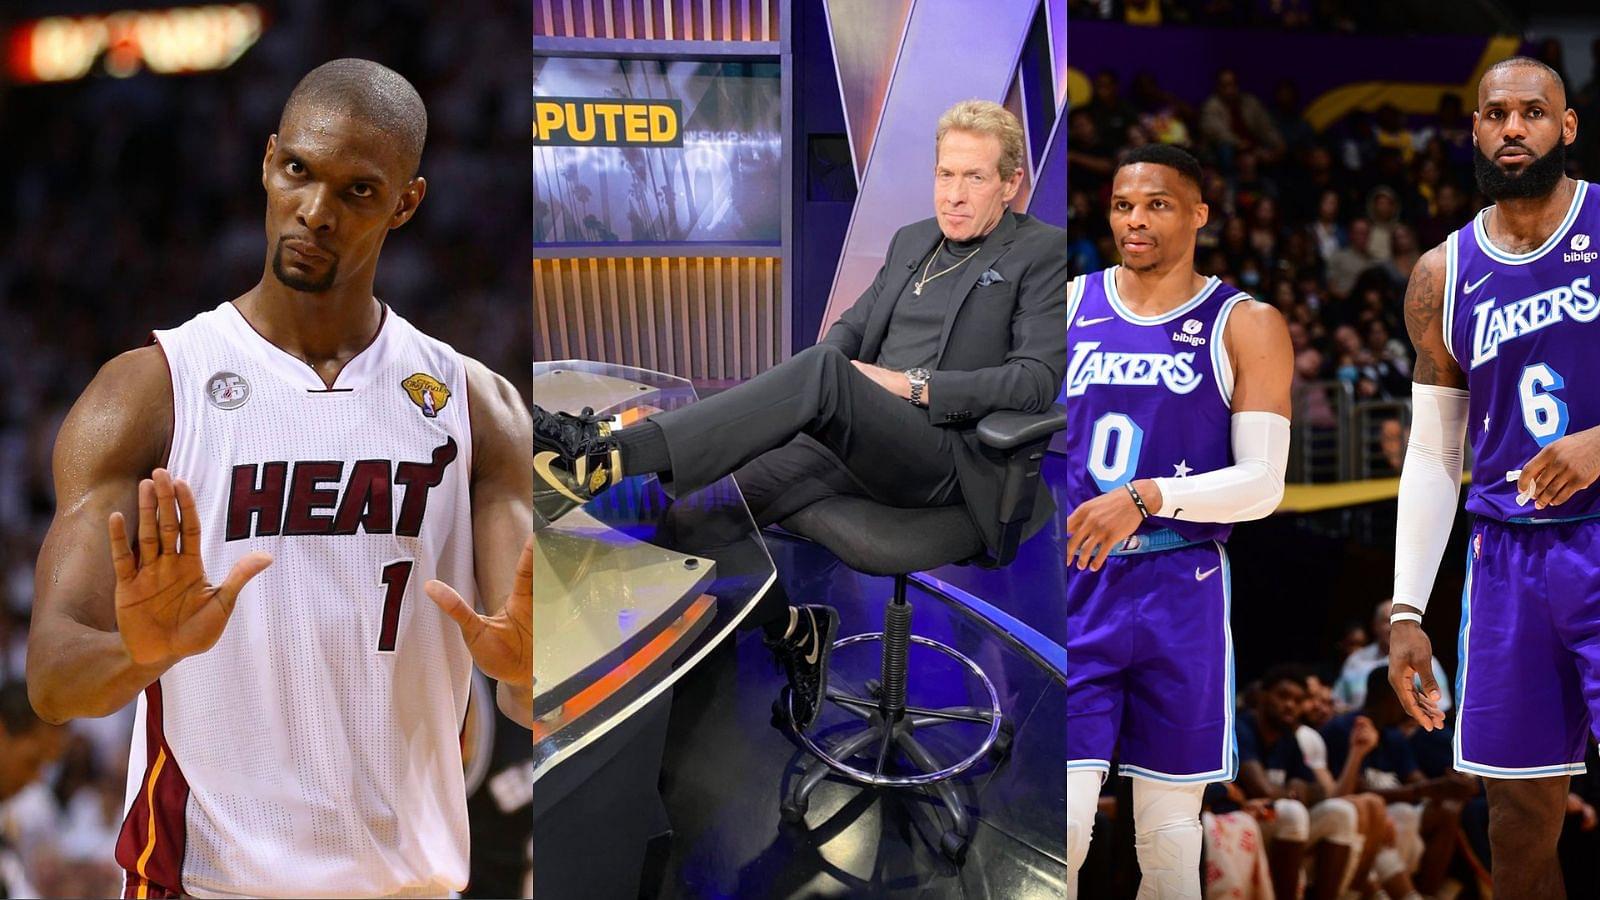 “Skip called him ‘Bosh Spice’ to his face, he’ll definitely not hesitate against Russell Westbrook”: NBA Twitter brings up Chris Bosh instance as Lakers star warns Fox Sports veteran 